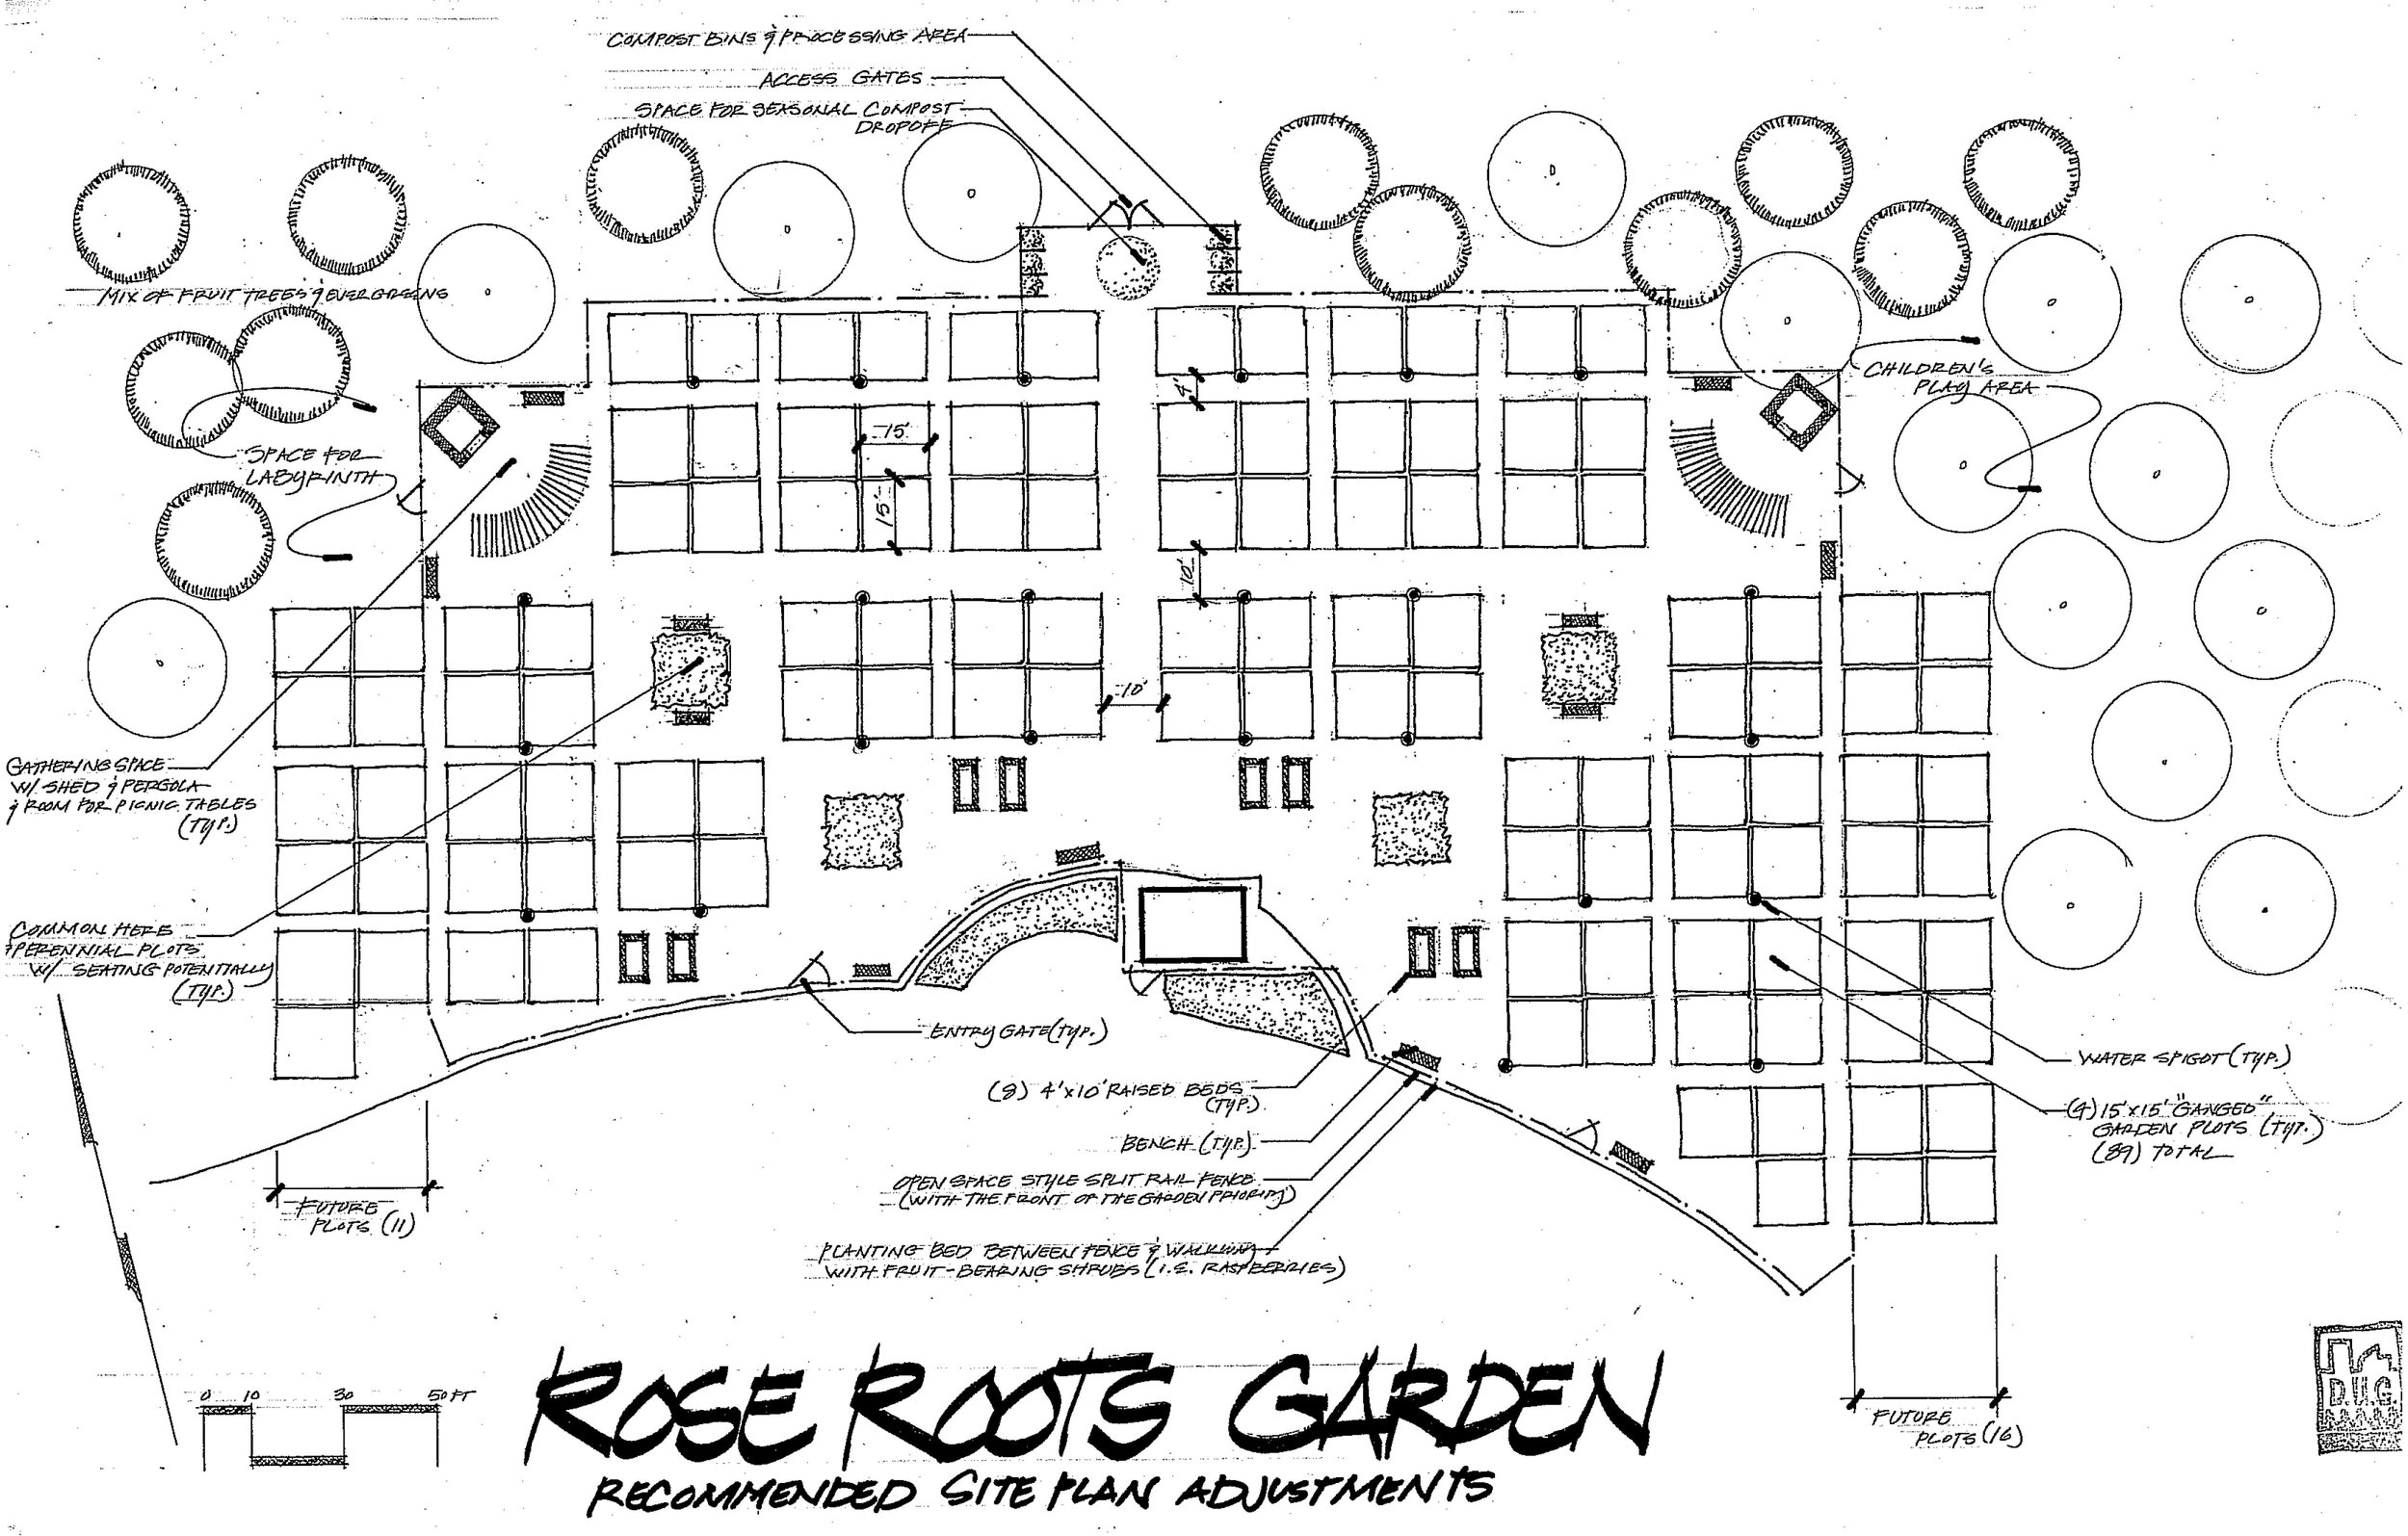 Rose Roots - Suggested Site Plan Adjustments - 1-17-12.jpg